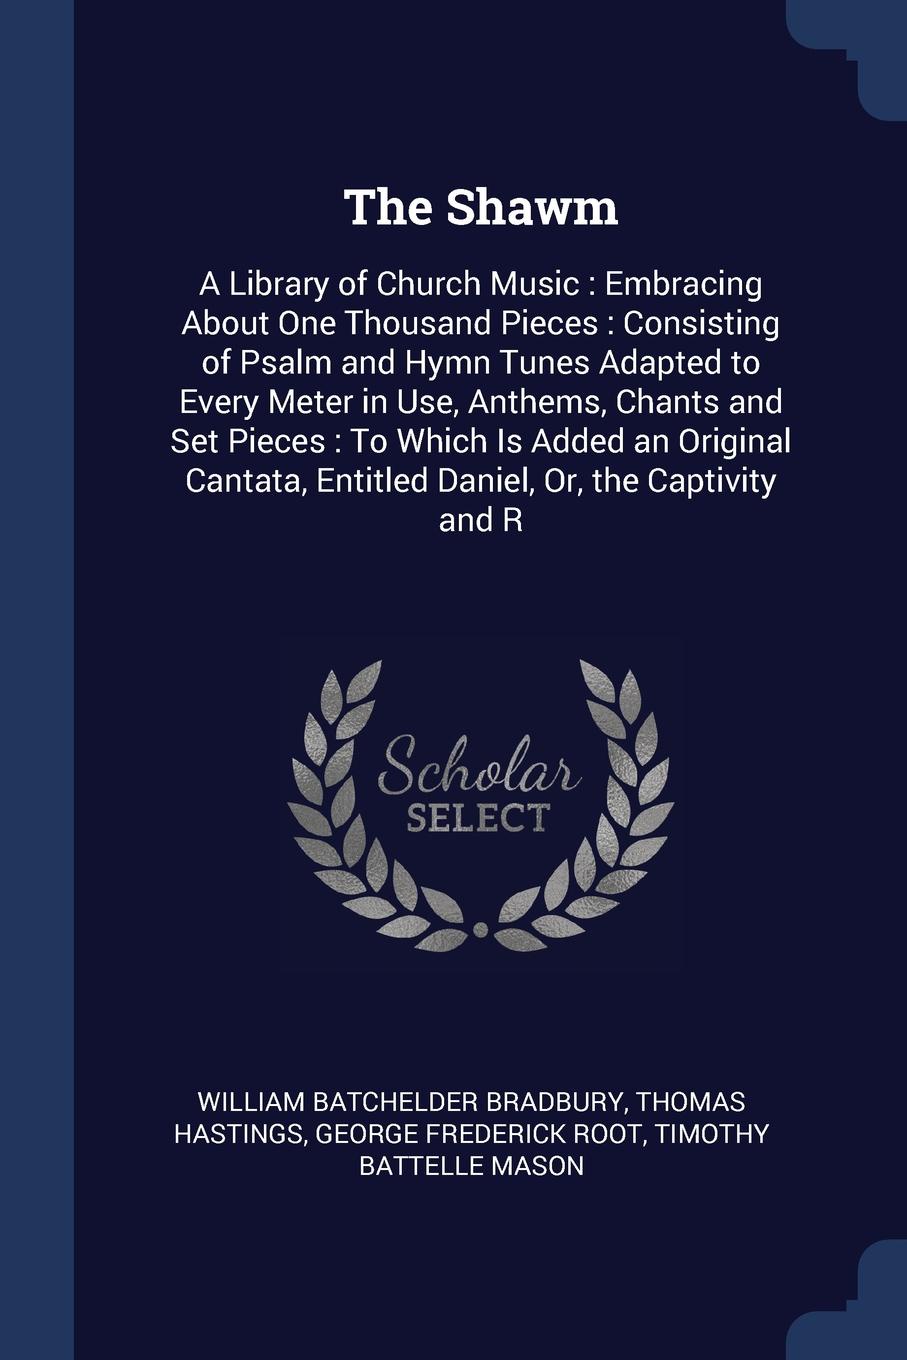 The Shawm. A Library of Church Music : Embracing About One Thousand Pieces : Consisting of Psalm and Hymn Tunes Adapted to Every Meter in Use, Anthems, Chants and Set Pieces : To Which Is Added an Original Cantata, Entitled Daniel, Or, the Captivi...